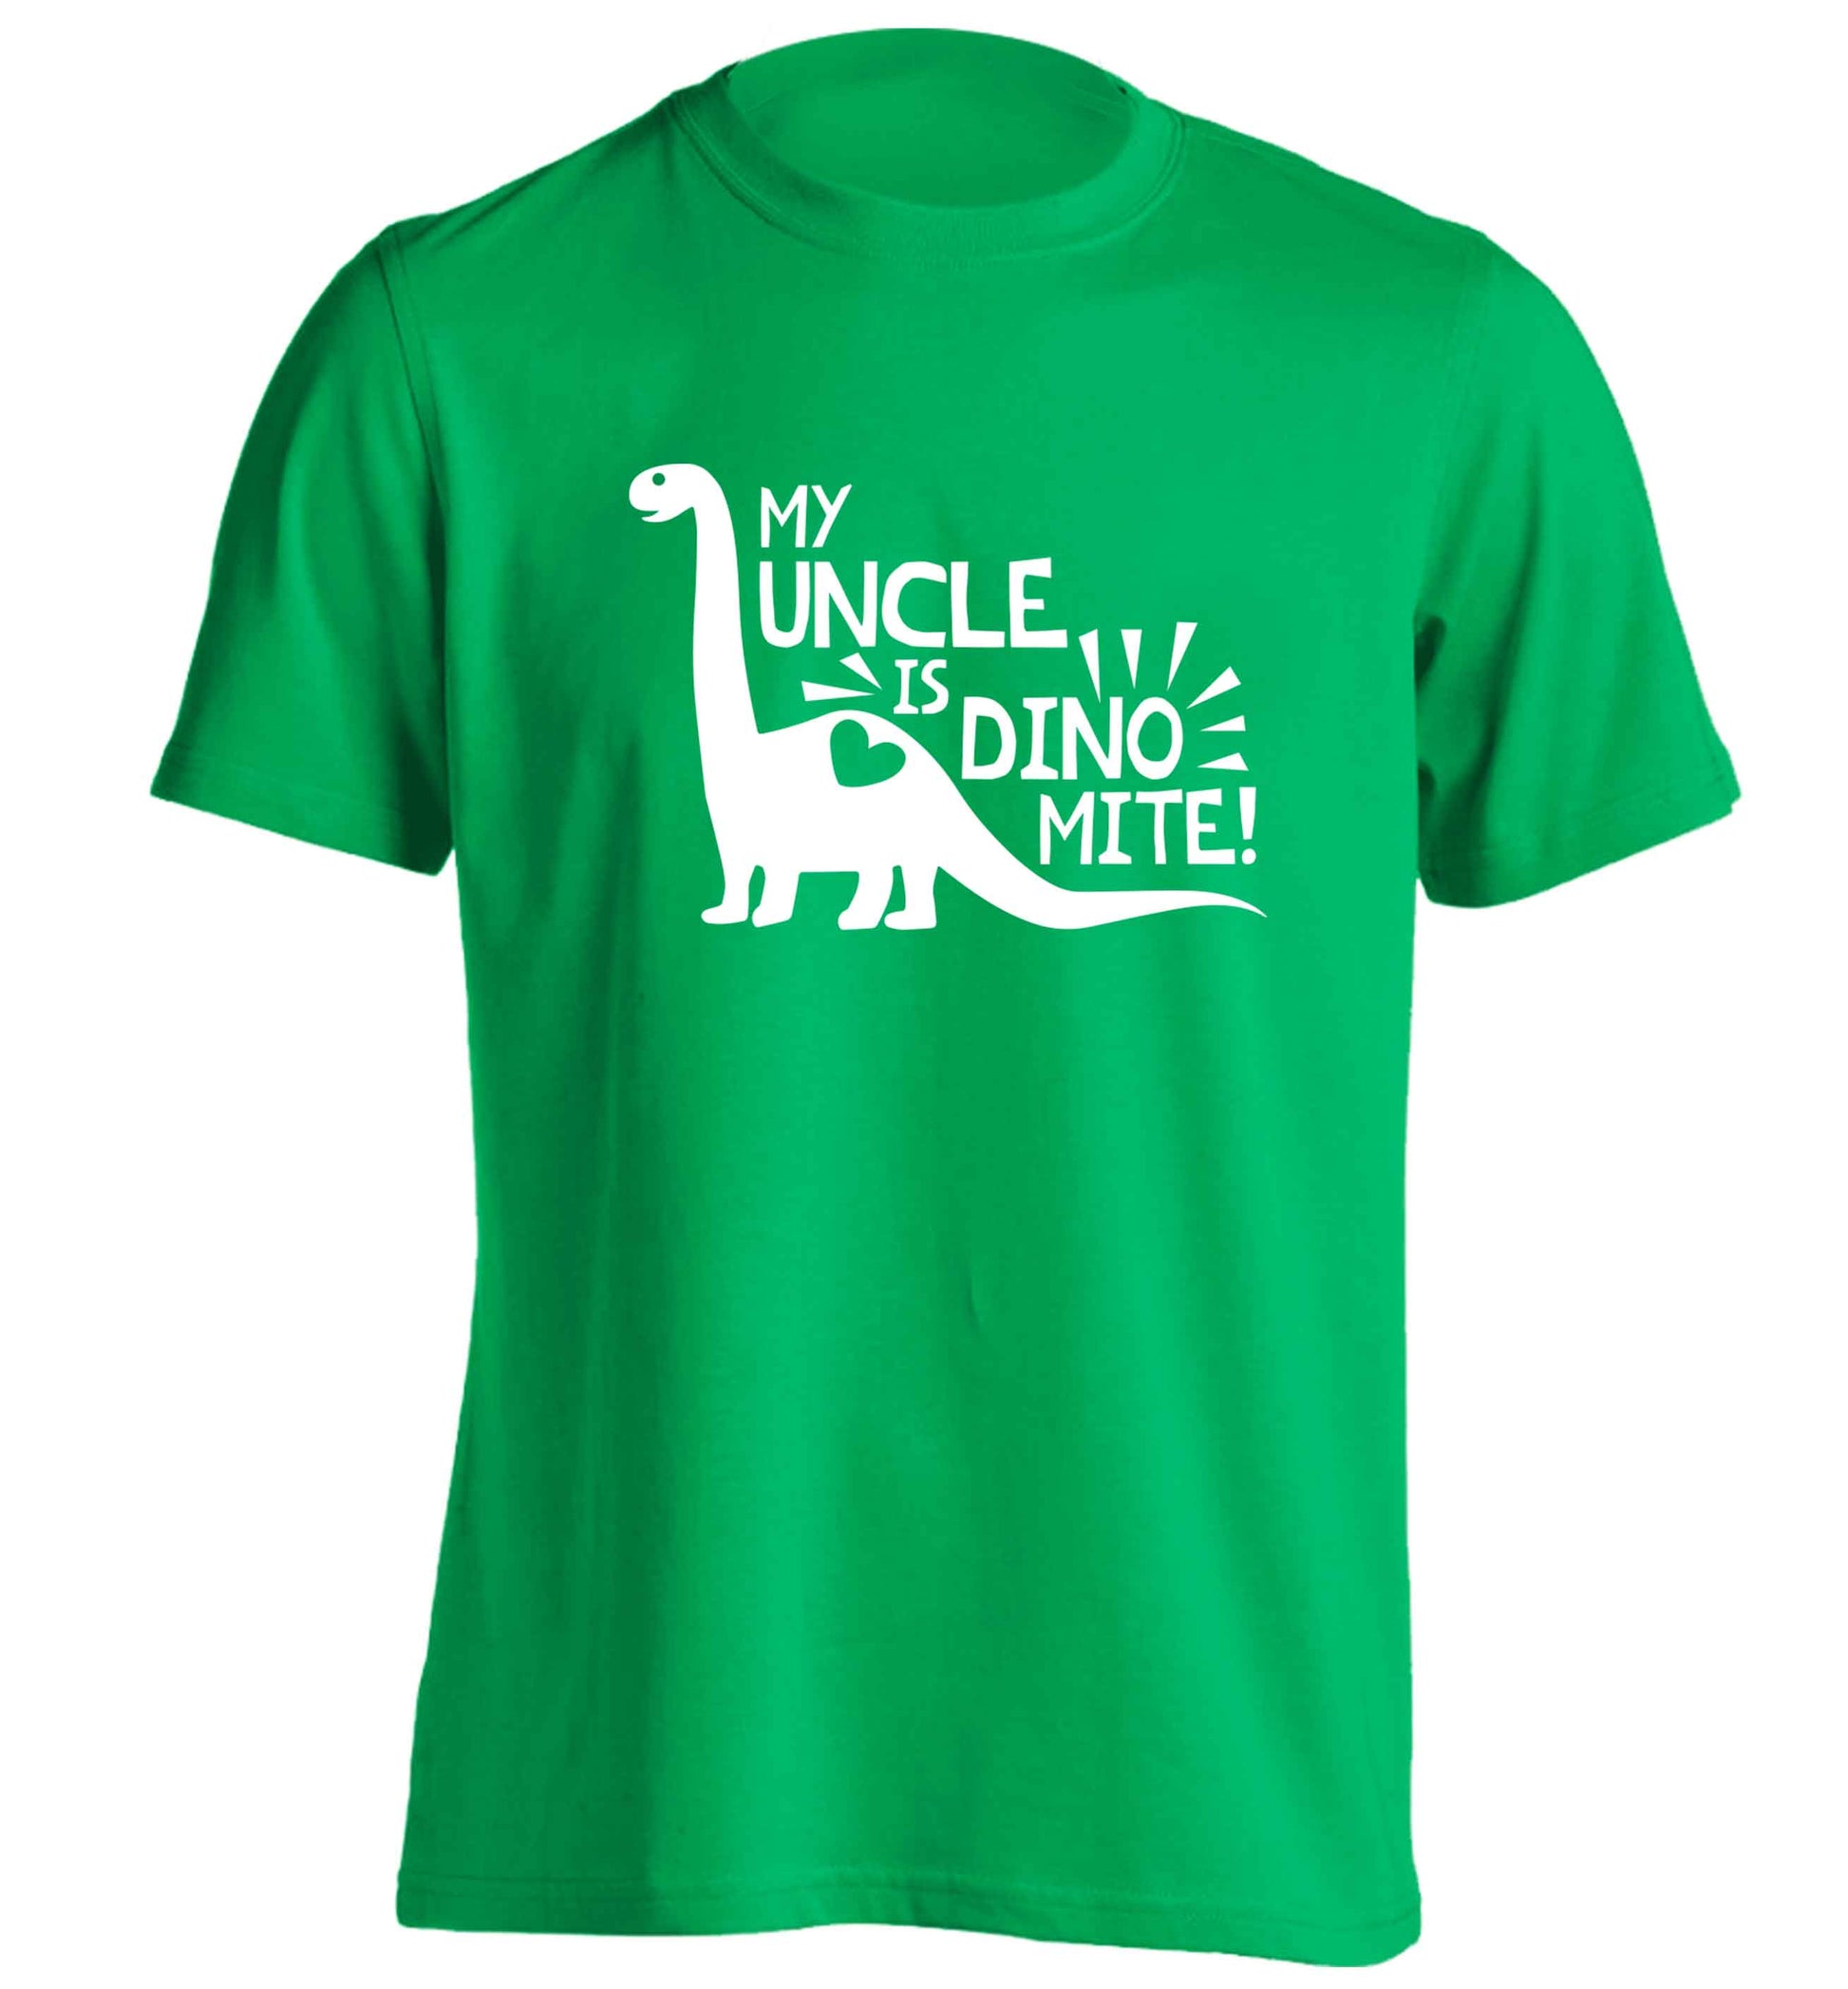 My uncle is dinomite! adults unisex green Tshirt 2XL